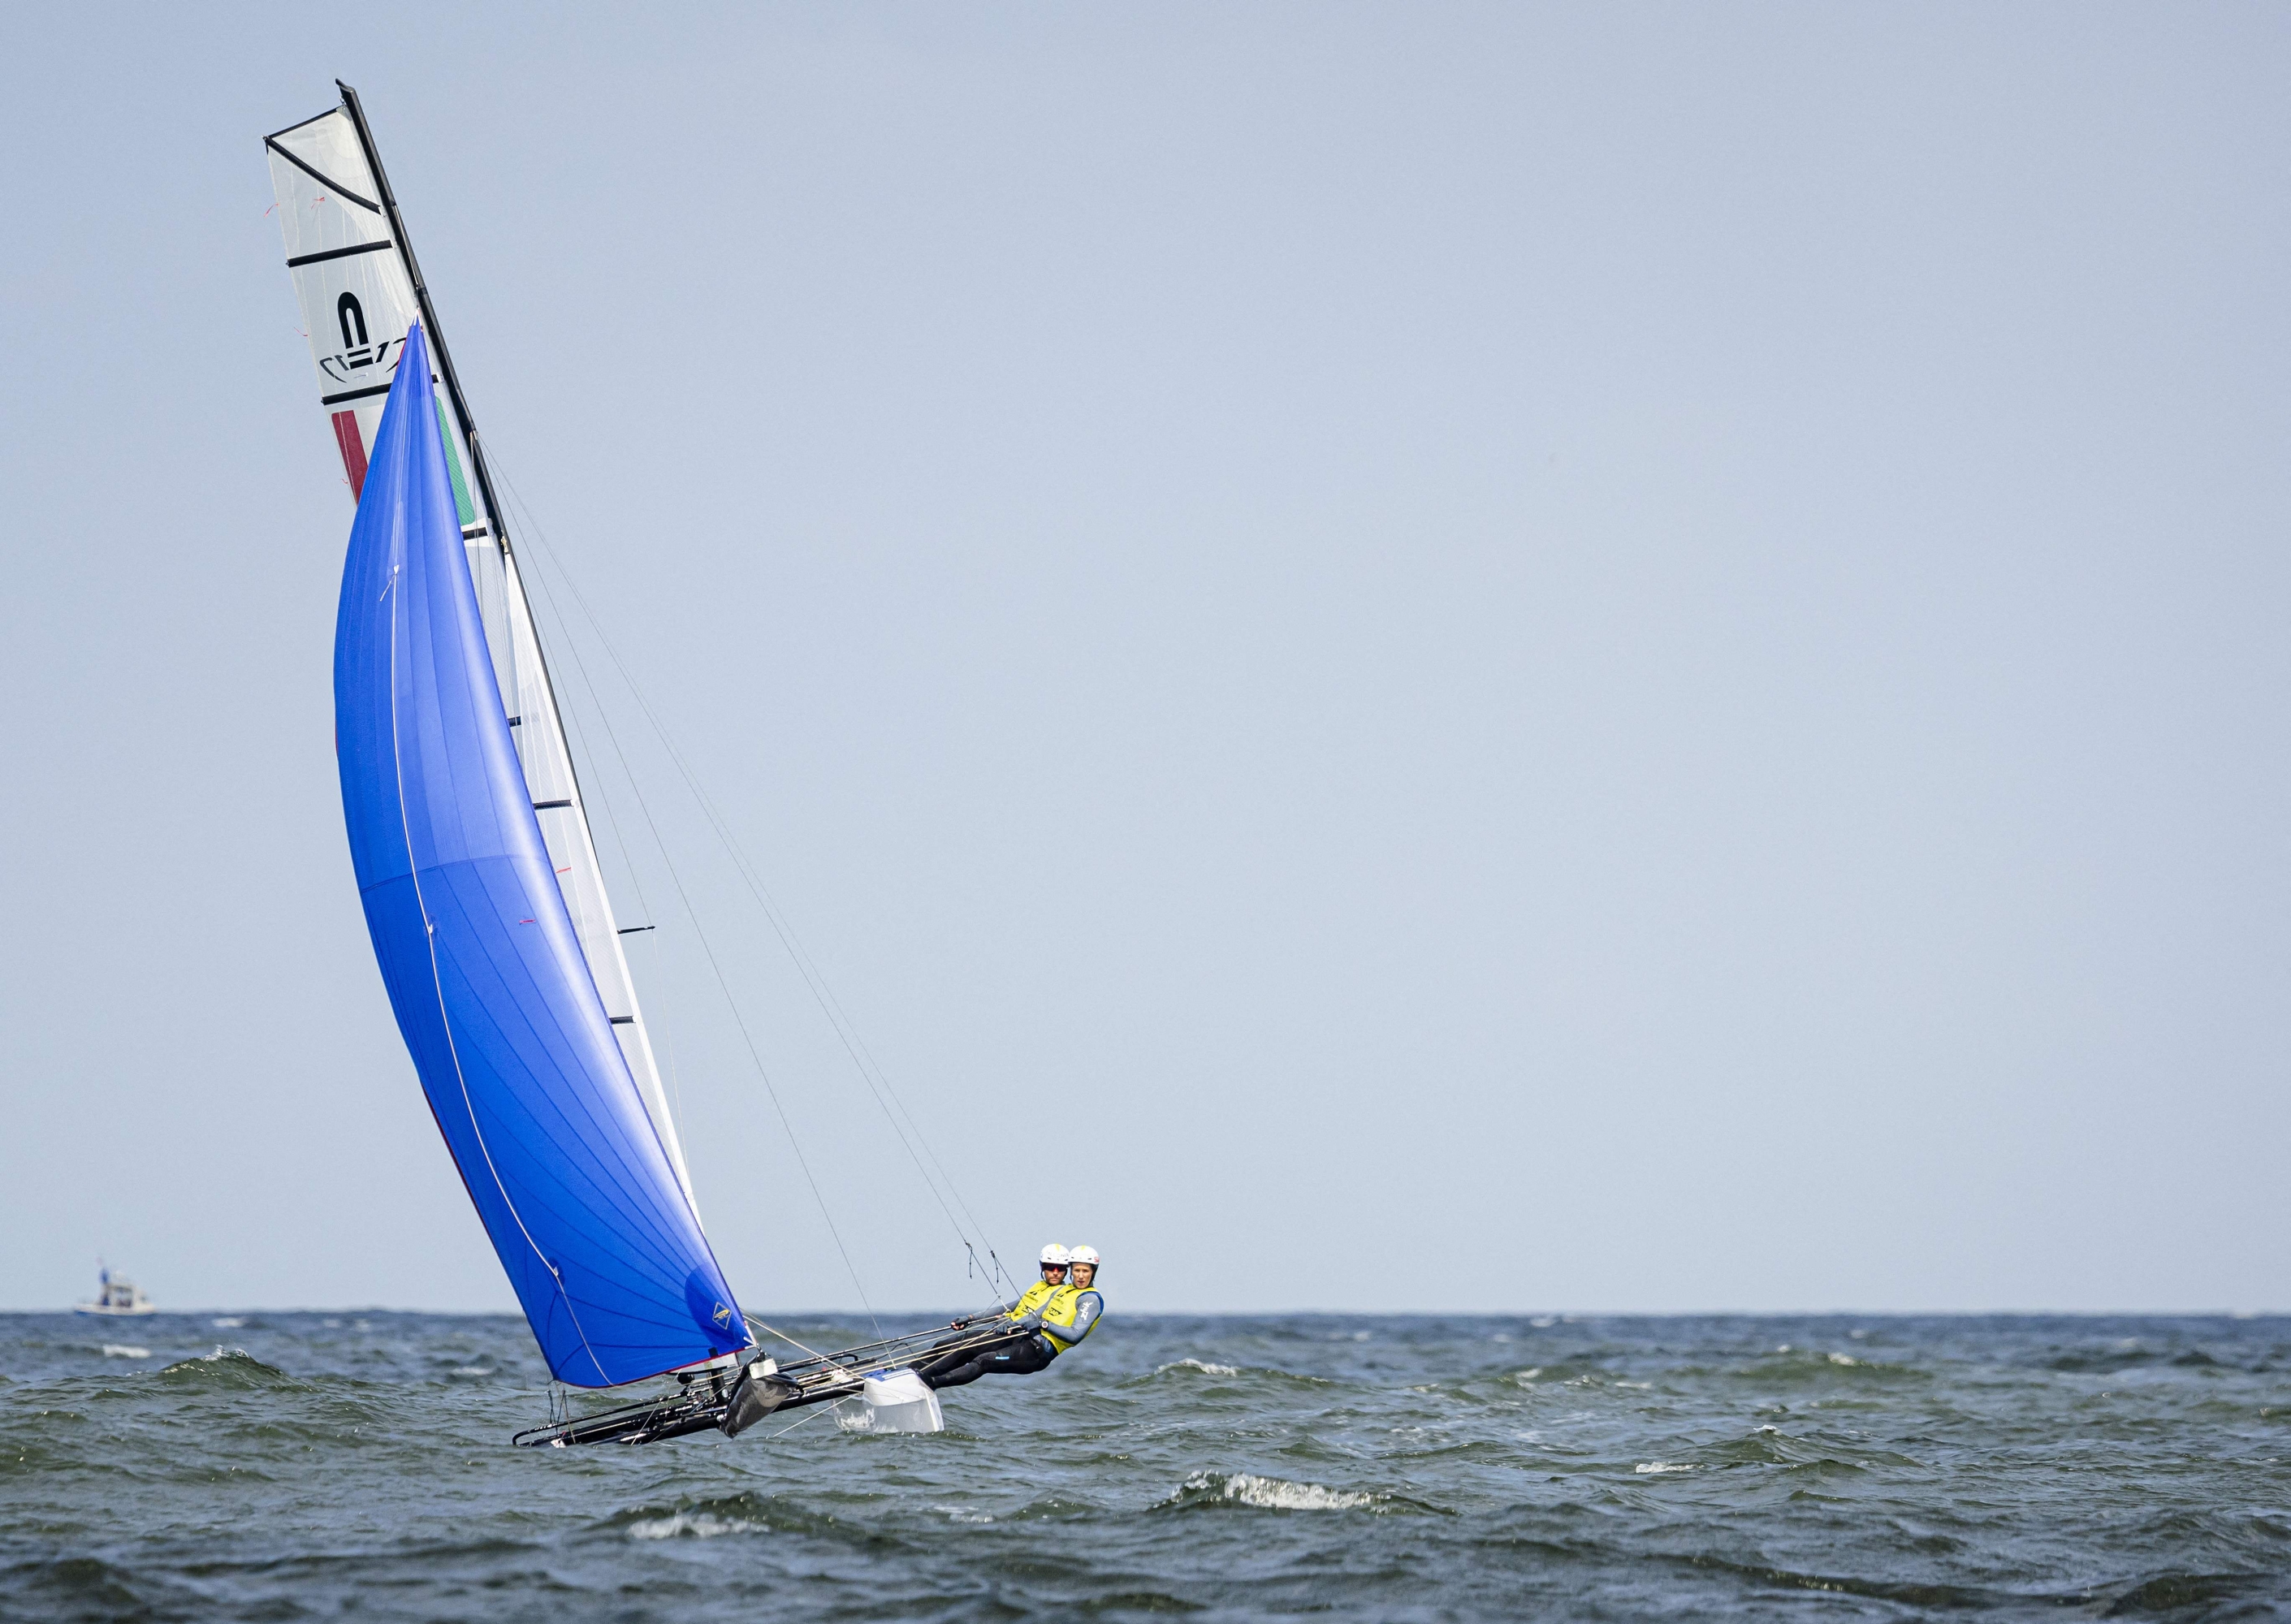 TOPSHOT - Caterina Banti and Ruggero Tita of Italy compete to win the gold medal in Nacra 17 World Championship in Scheveningen, The Hague, on August 17, 2023. (Photo by Sem van der Wal / ANP / AFP) / Netherlands OUT